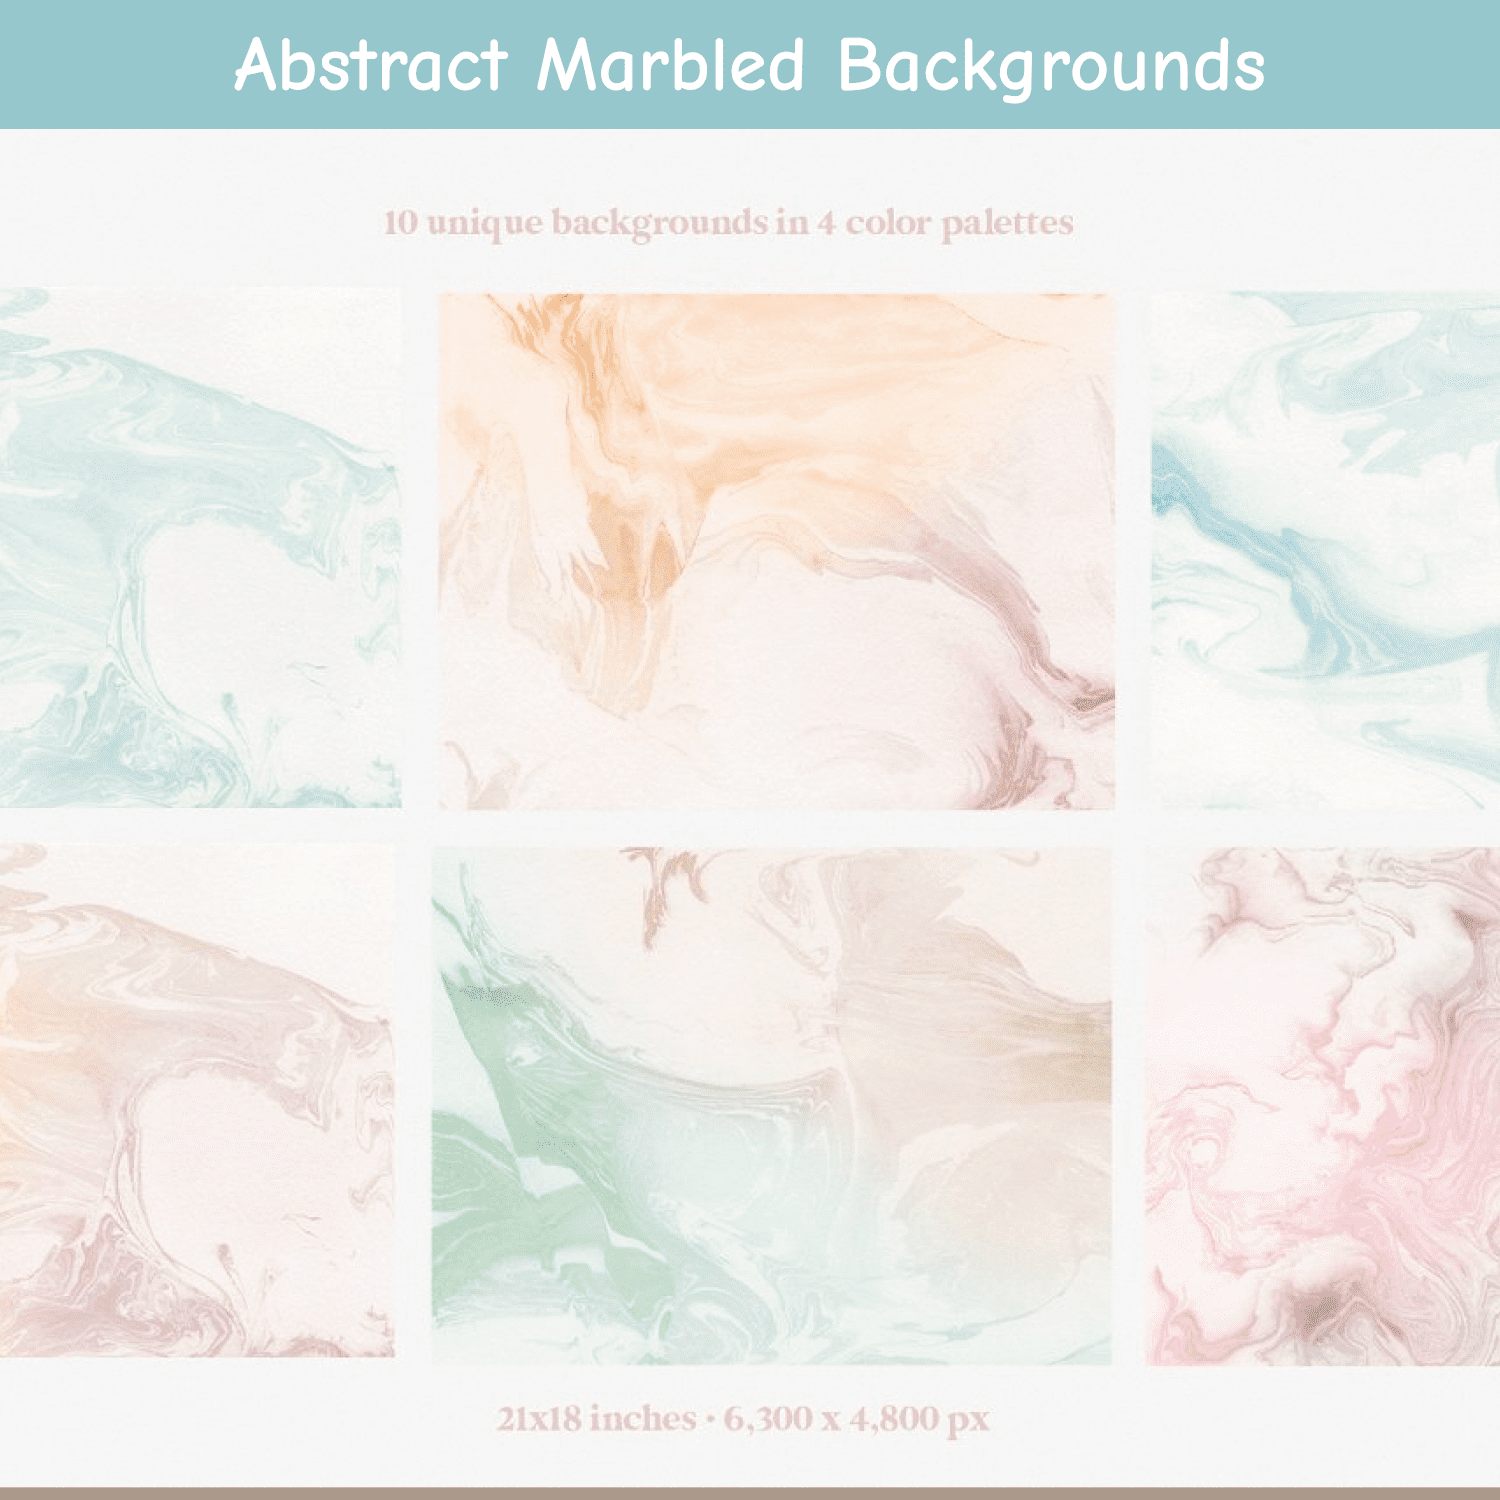 Abstract Marbled Backgrounds.